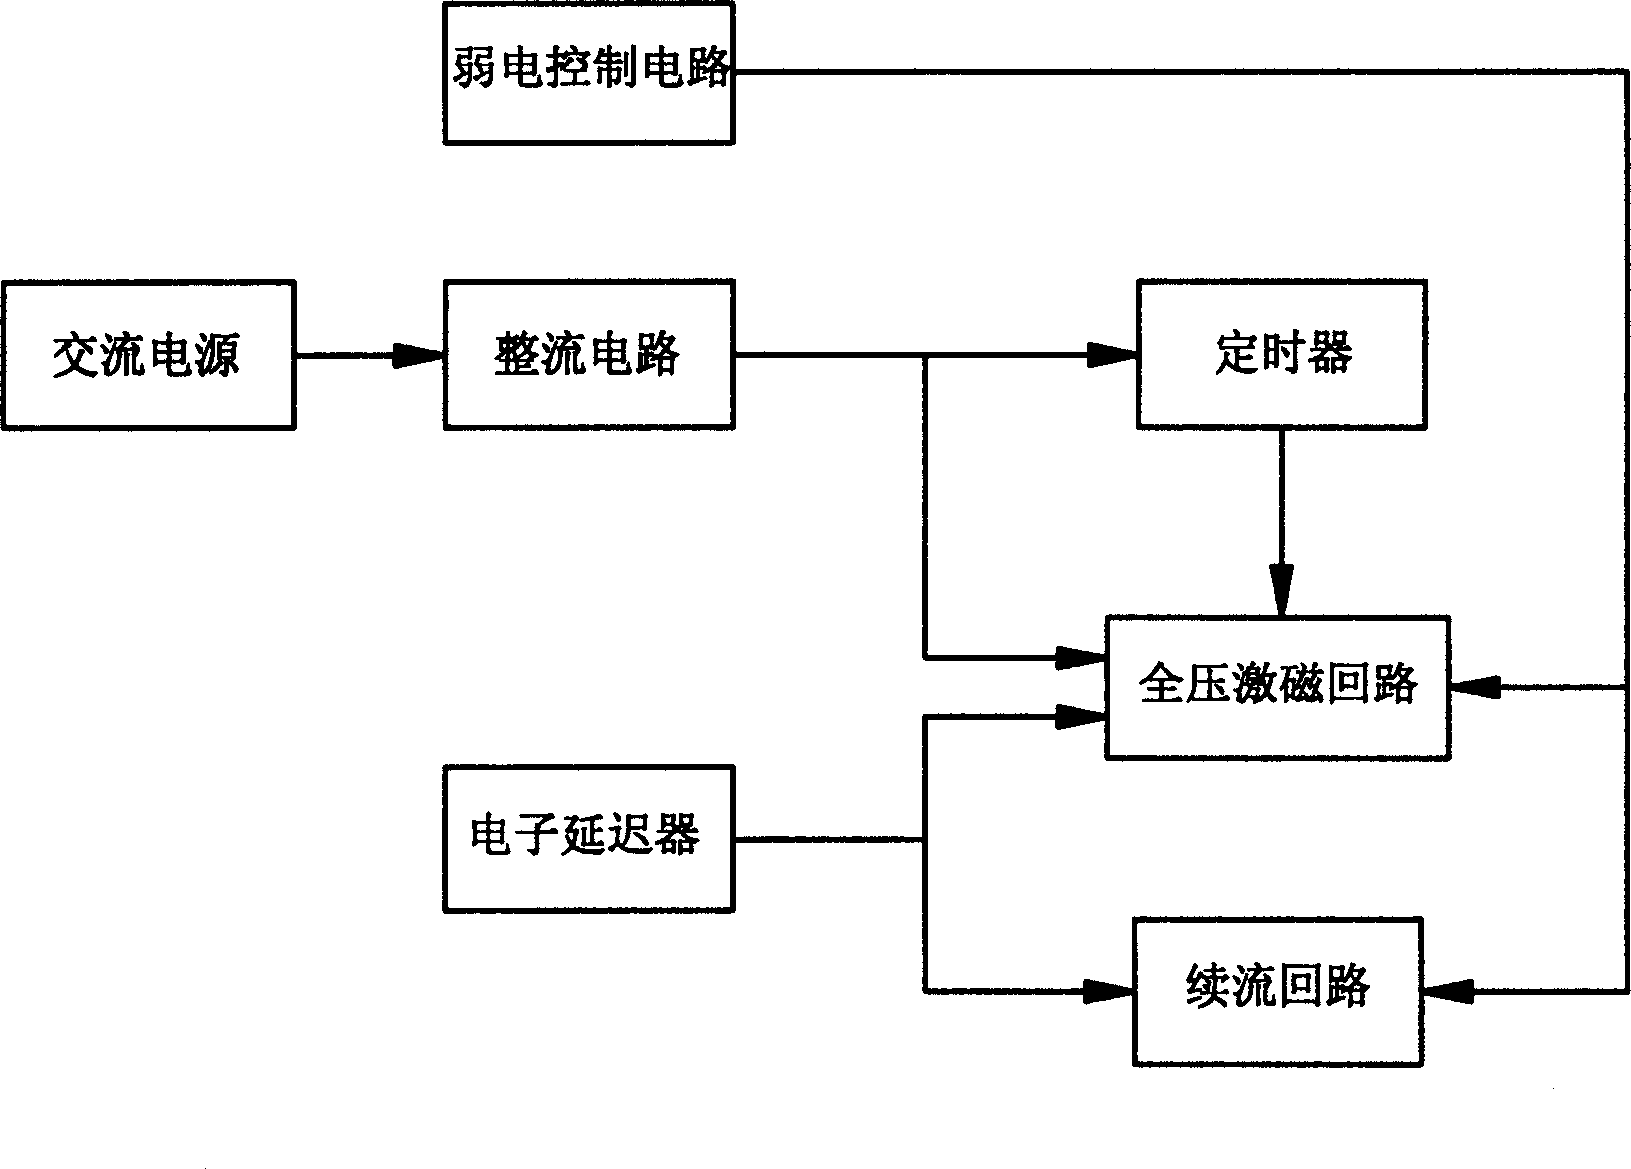 Controller for electromagnetic system of universal contactor